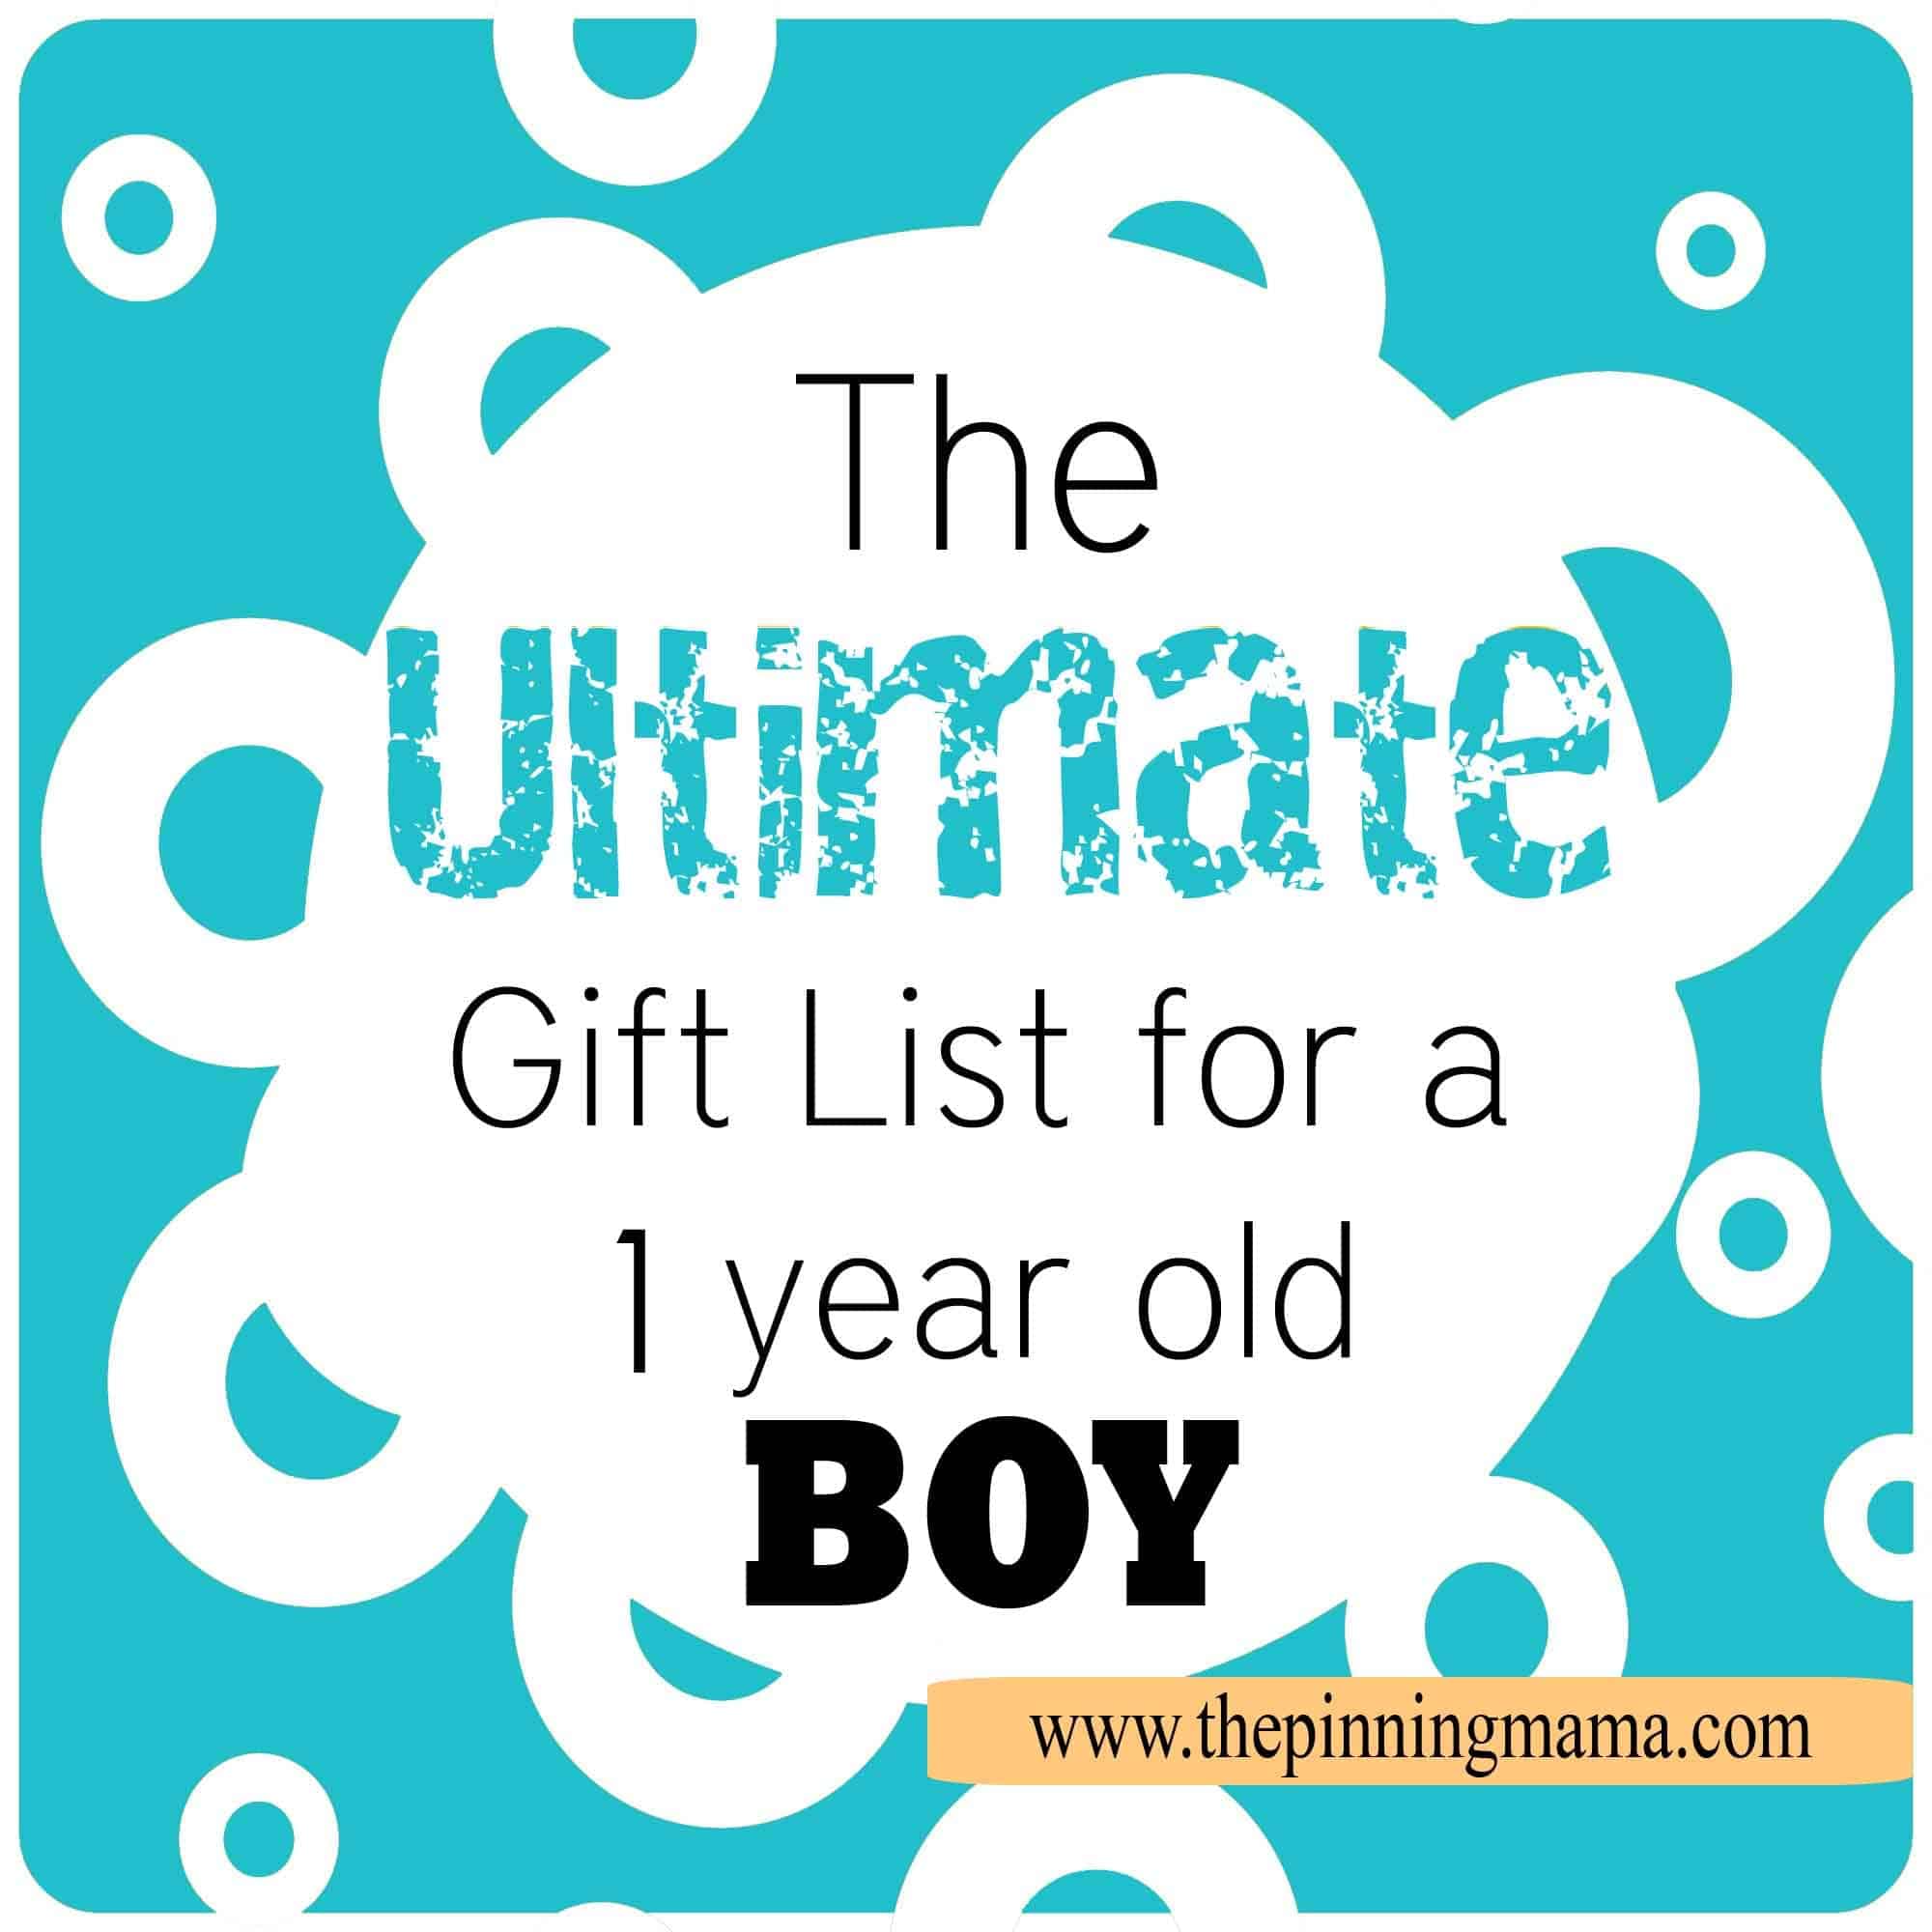 one year old gift ideas for boy